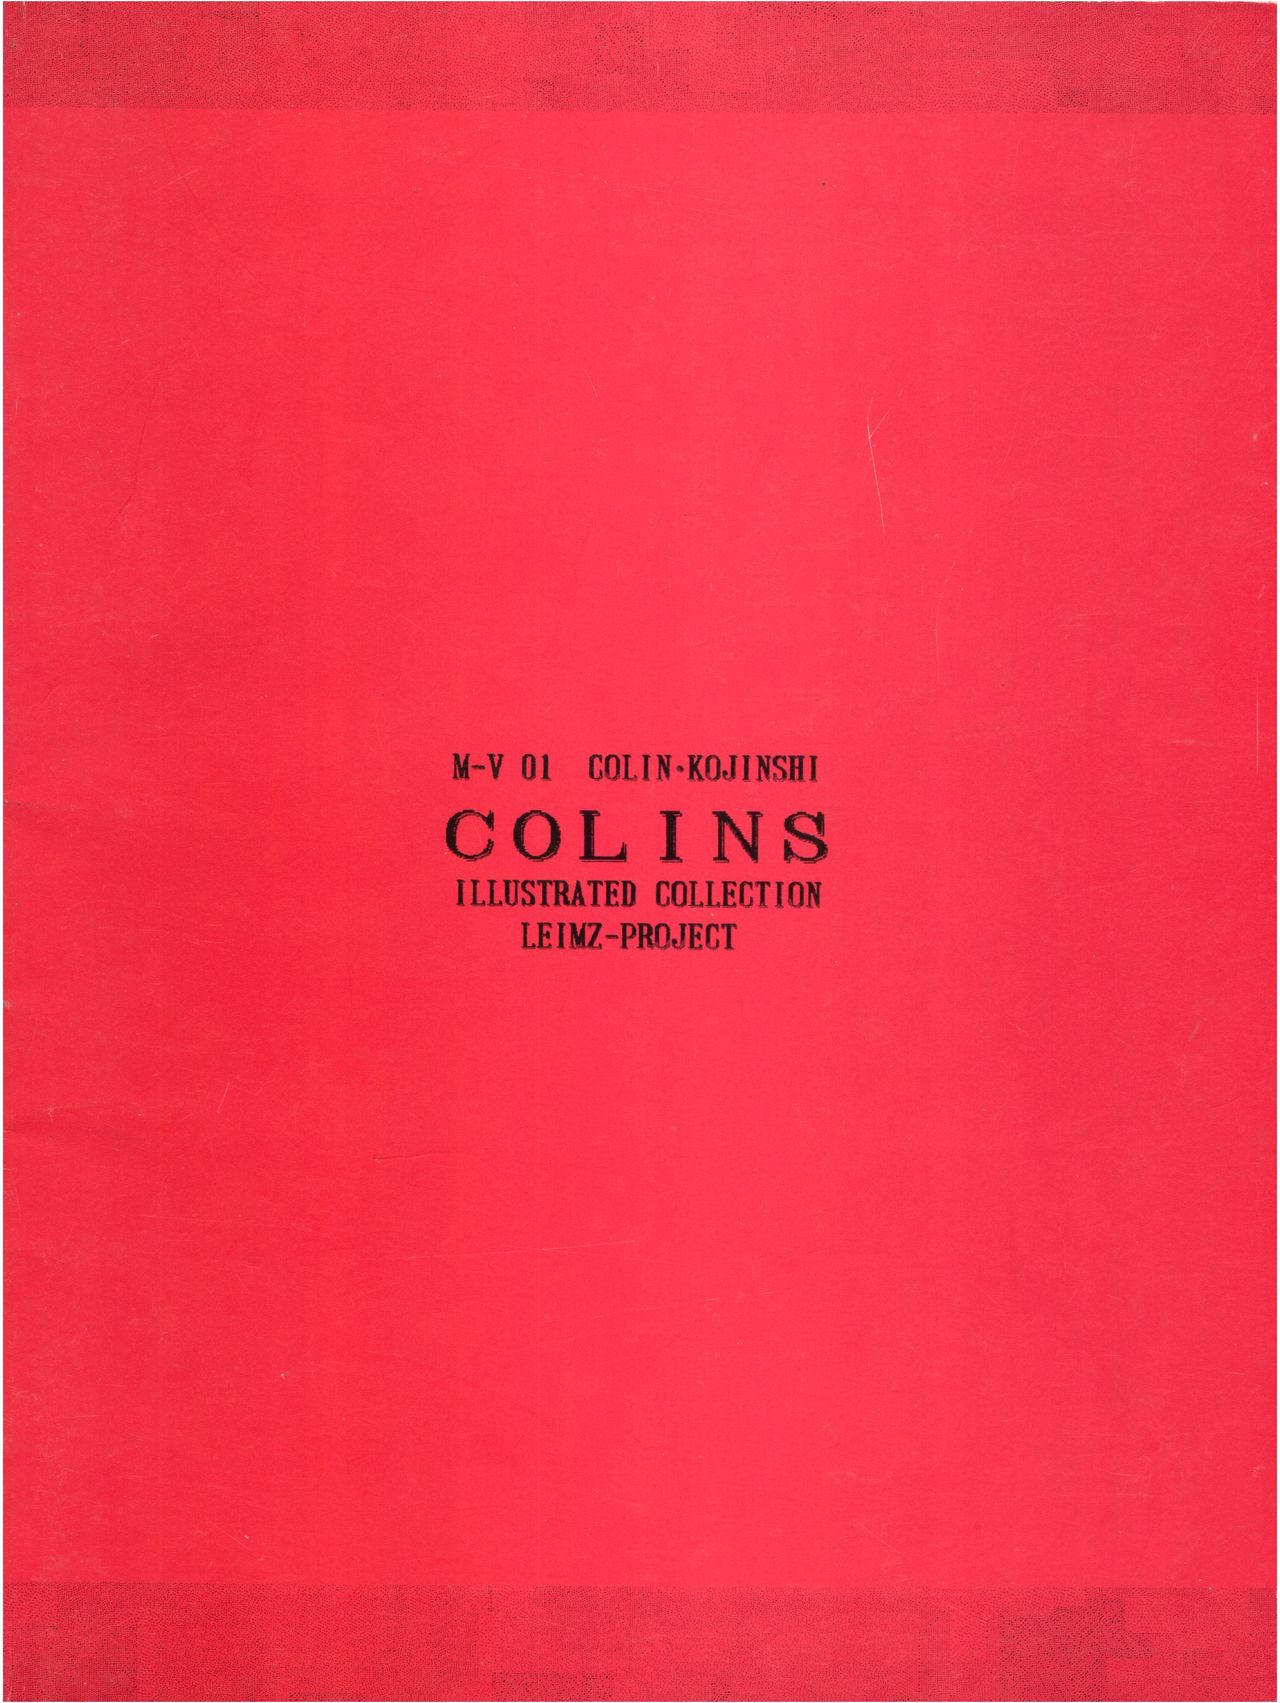 [LEIMZ-PROJECT (COLIN)] COLINS ILLUSTRATED COLLECTION (めぞん一刻、ダーティペア)